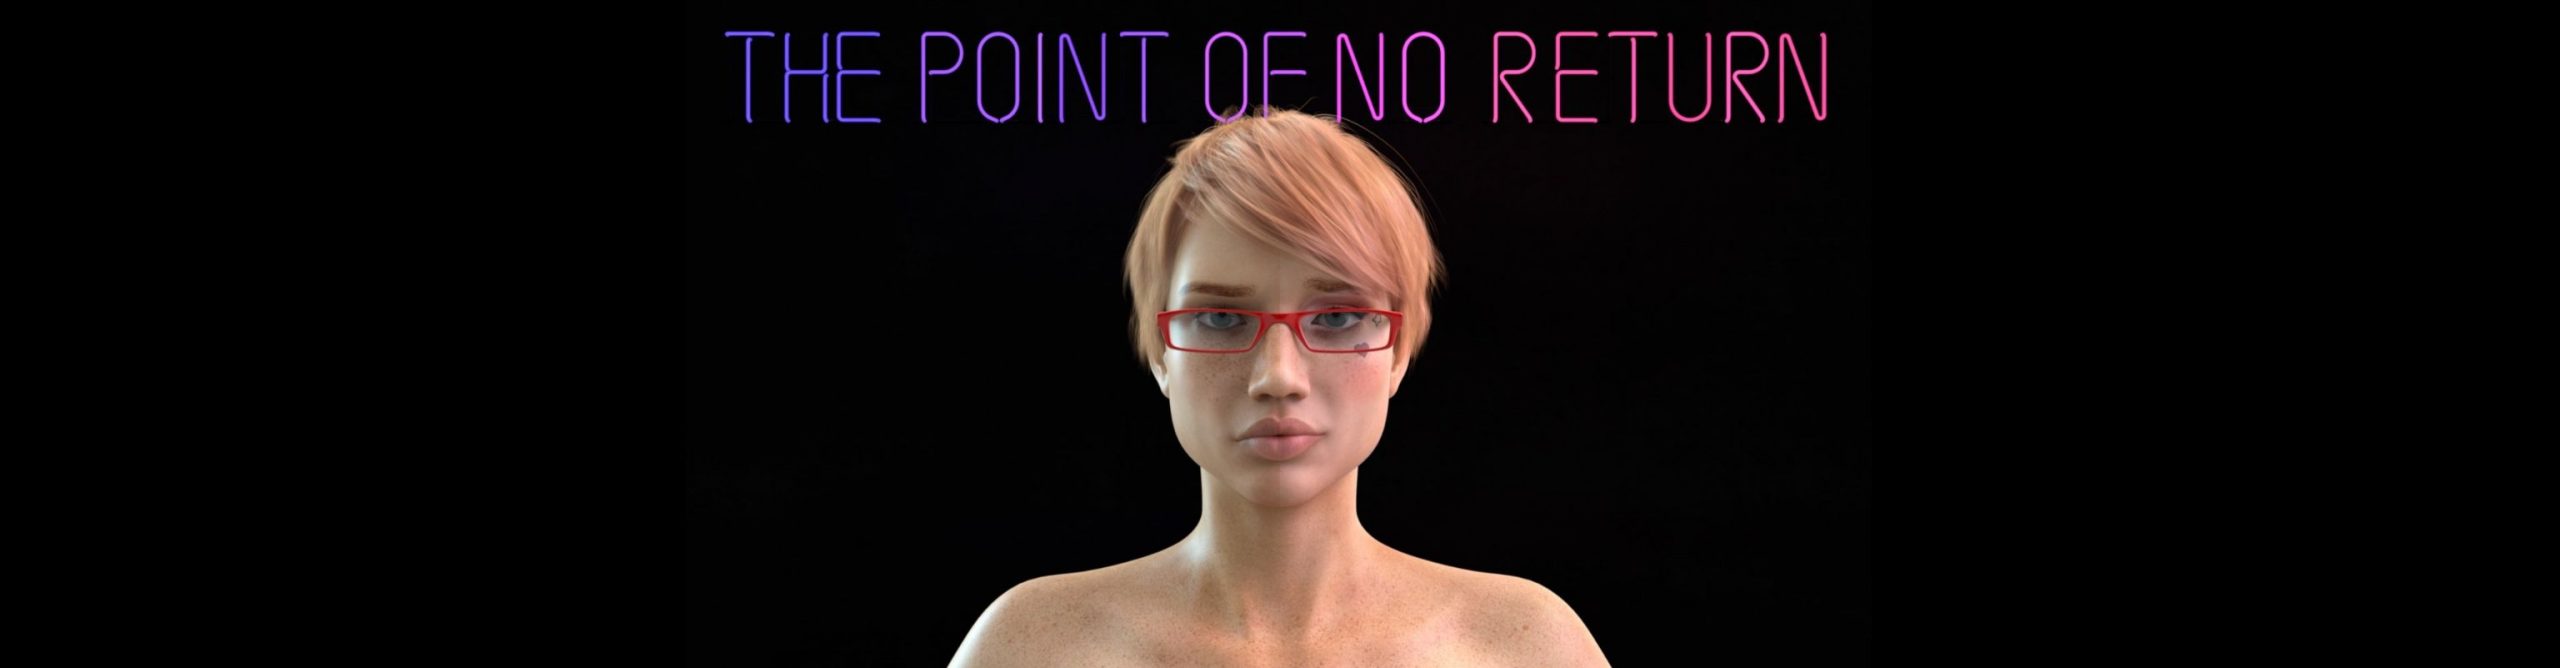 The Point Of No Return Apk